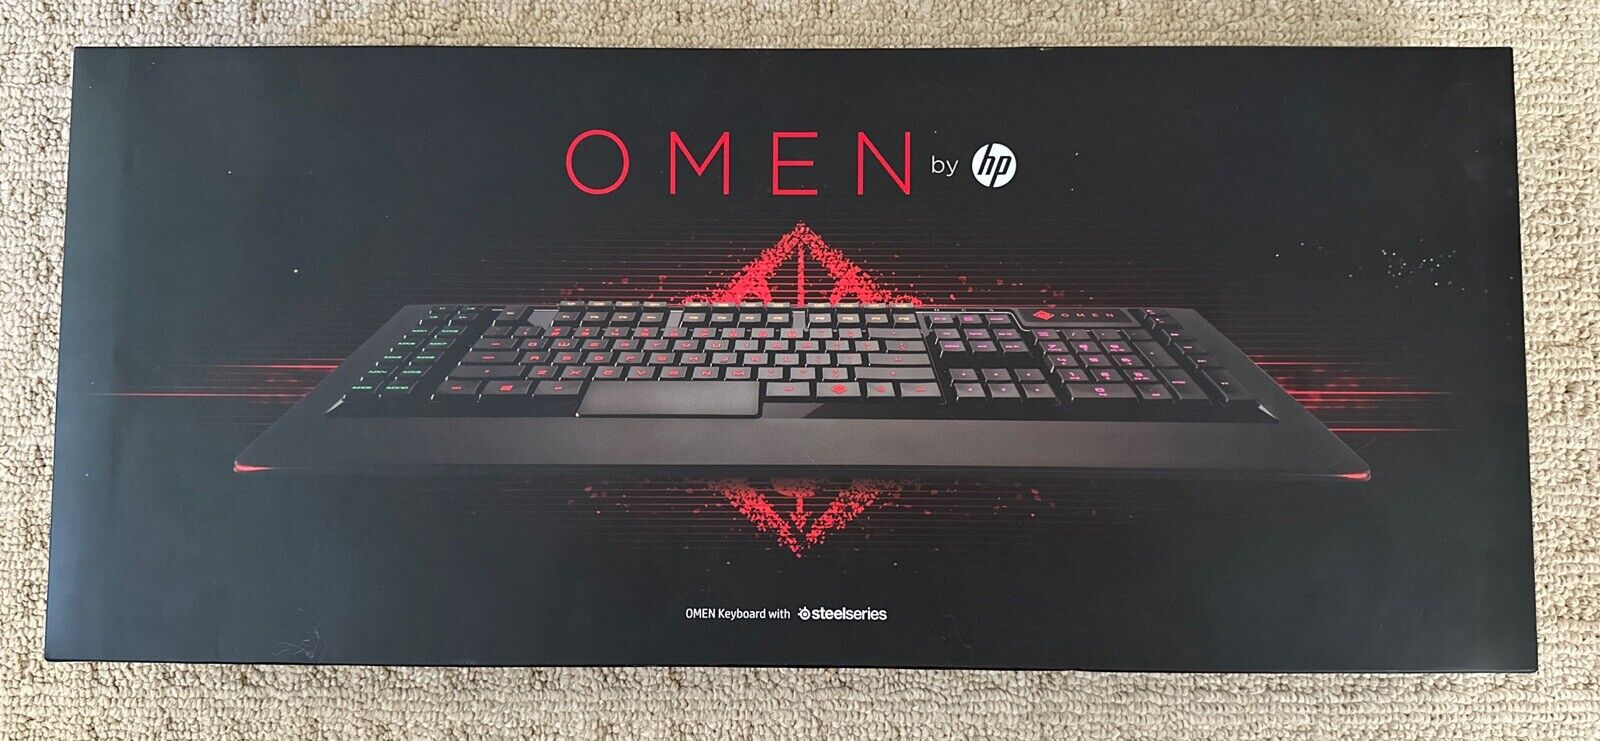 New Sealed Omen Keyboard by HP with SteelSeries. X7Z97AA#ABA